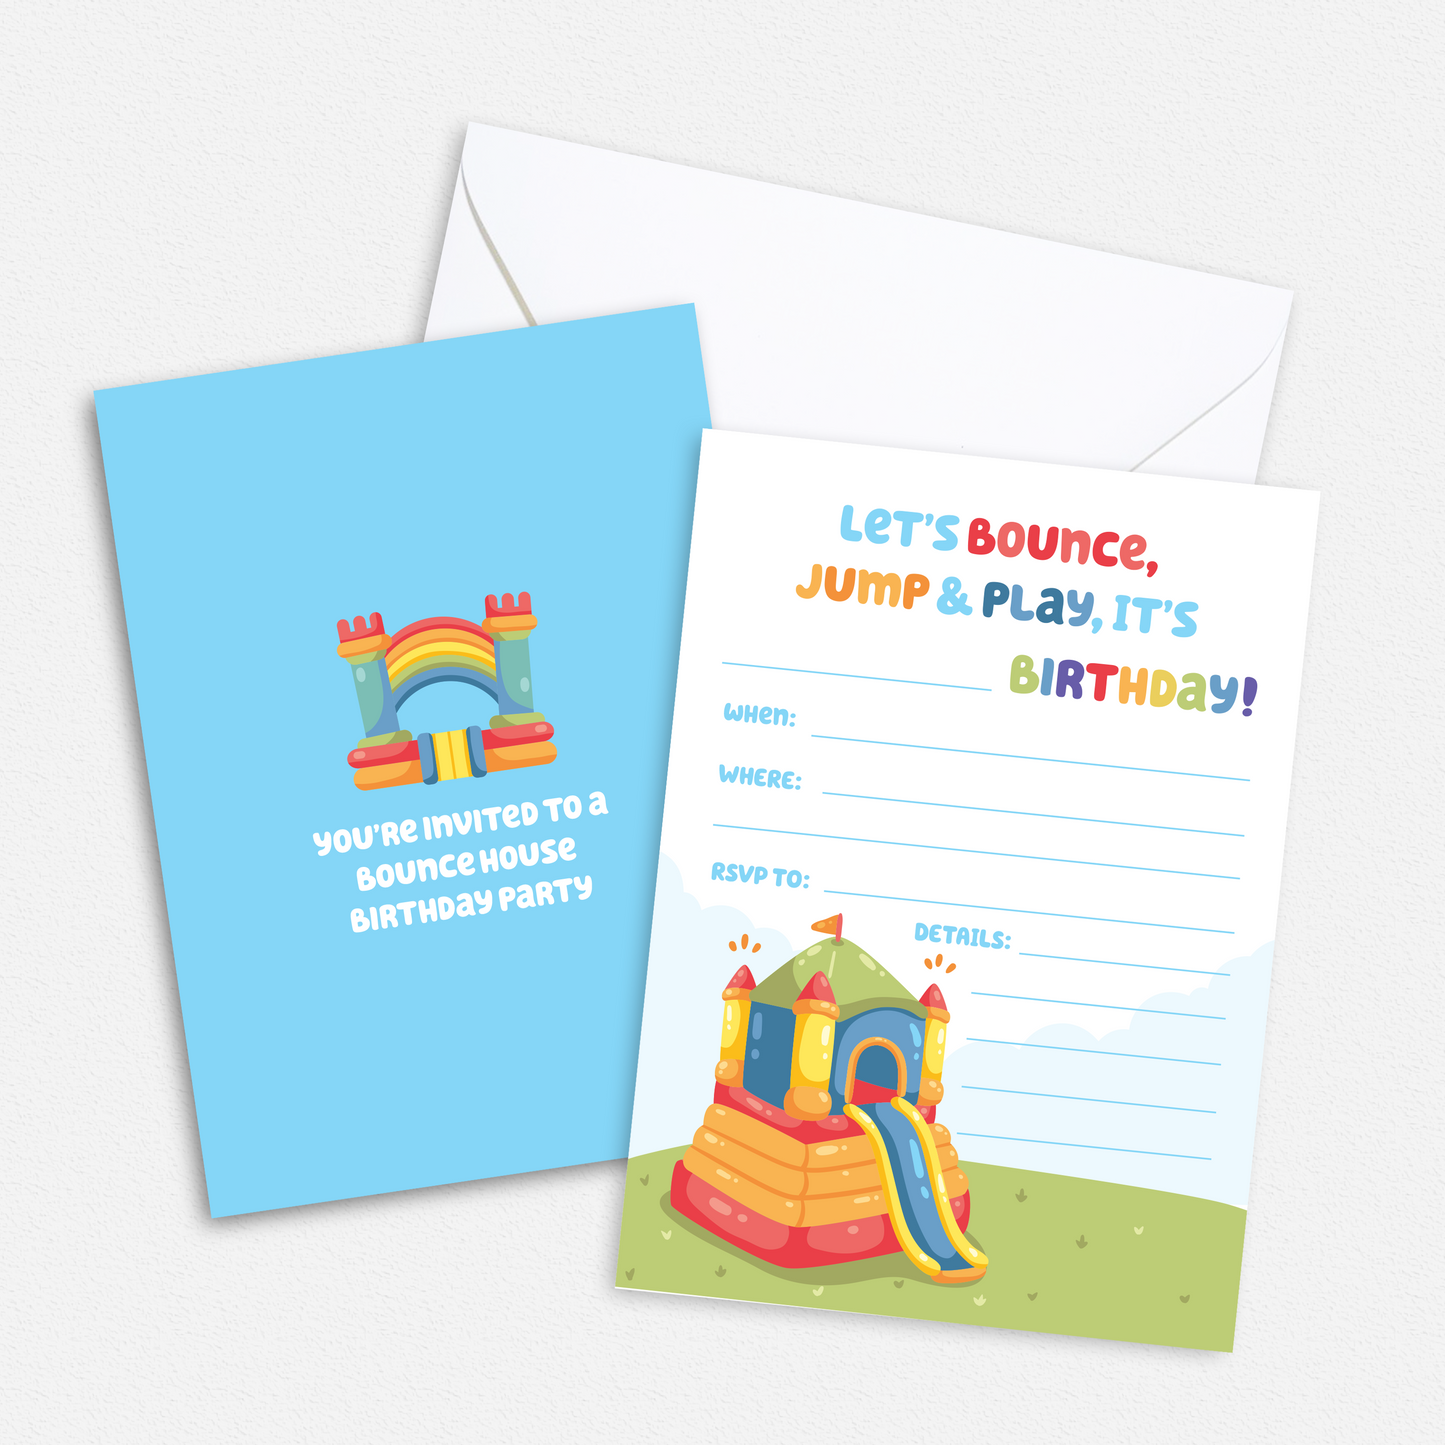 Bounce House Birthday Party Invitation - Custom OR Fill-in-the-Blank - Set of 24